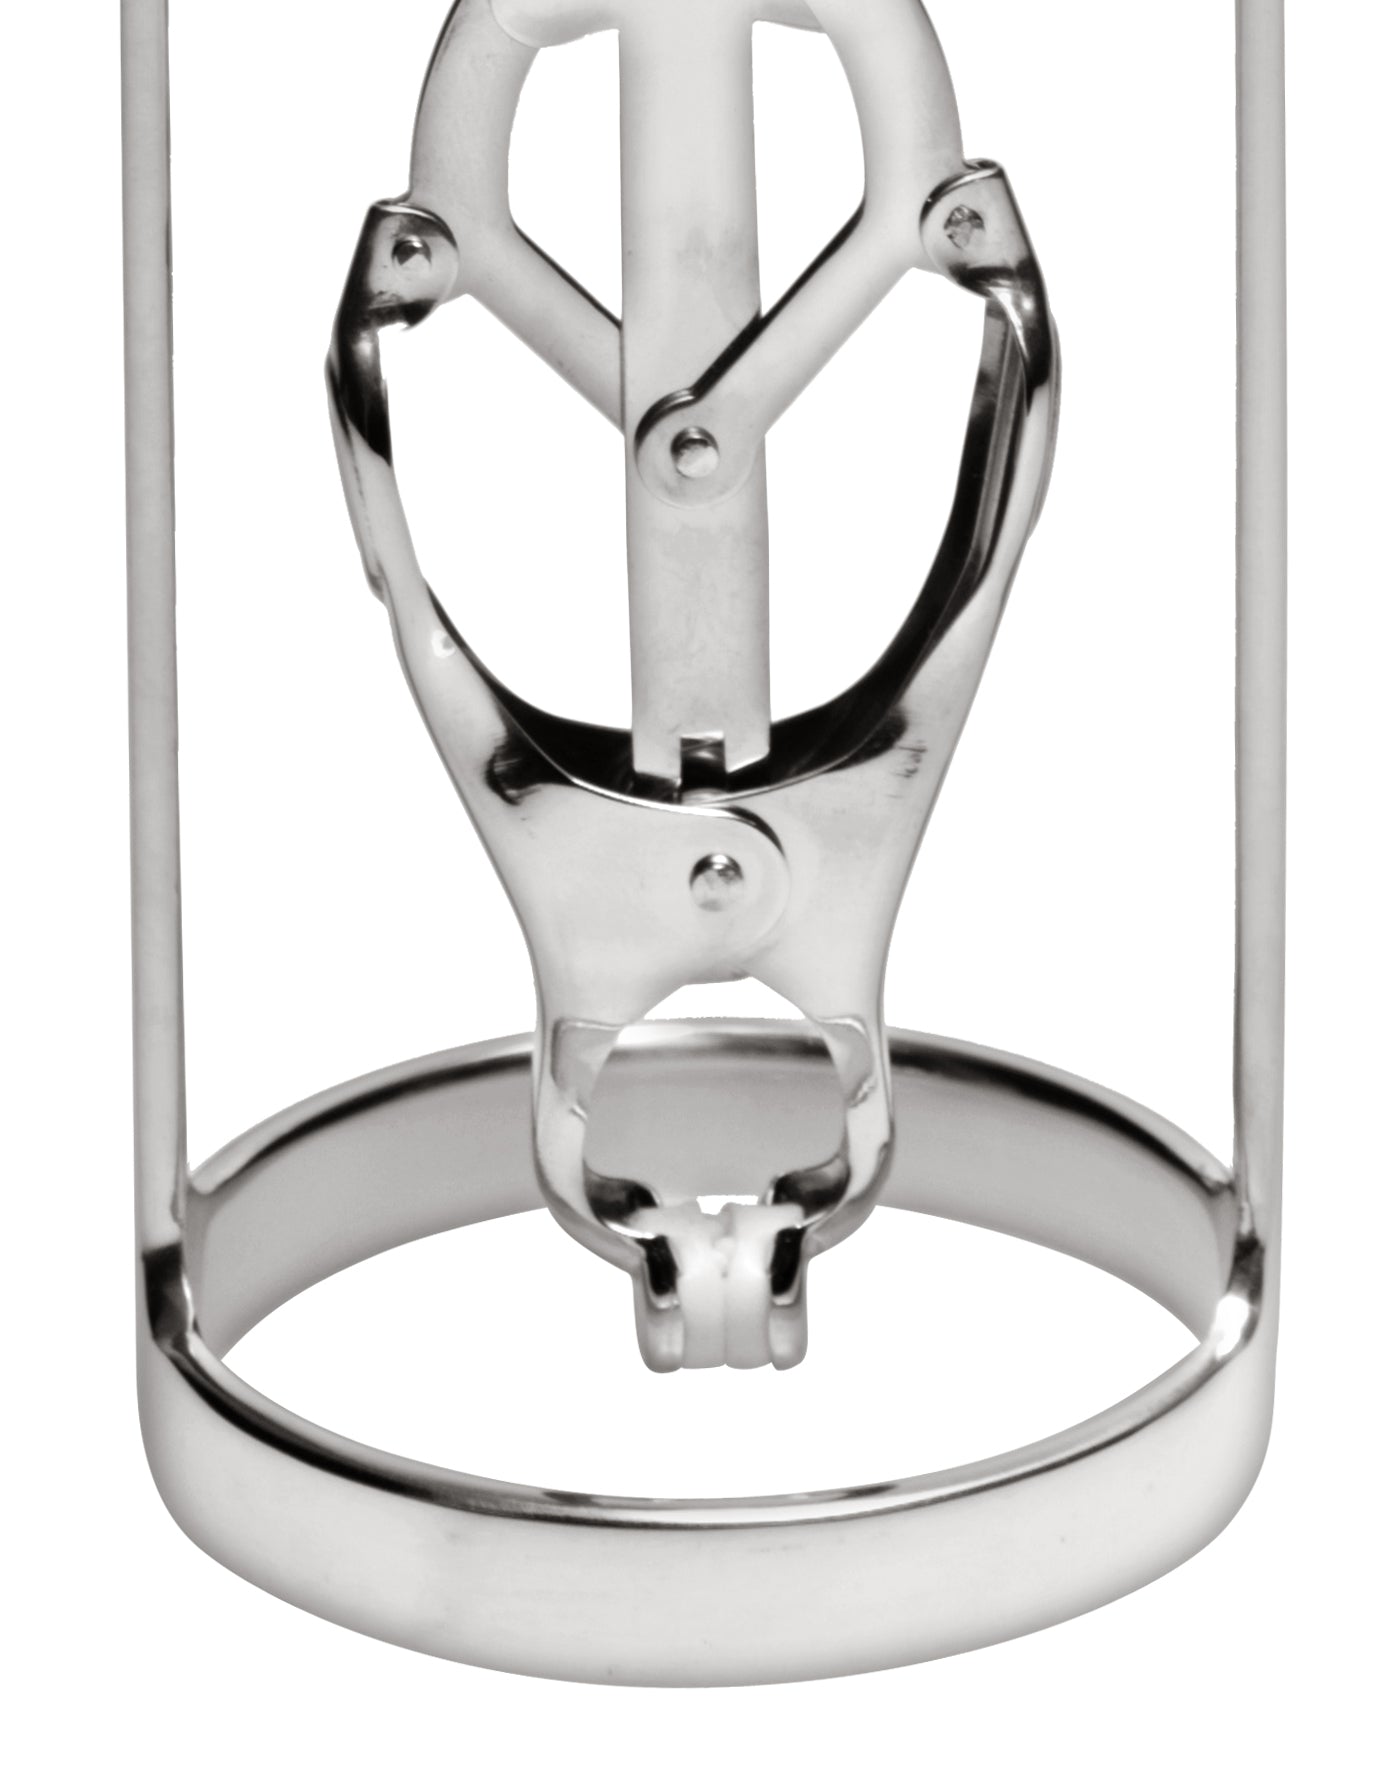 Stainless Steel Clover Clamp Nipple Stretcher - Just for you desires